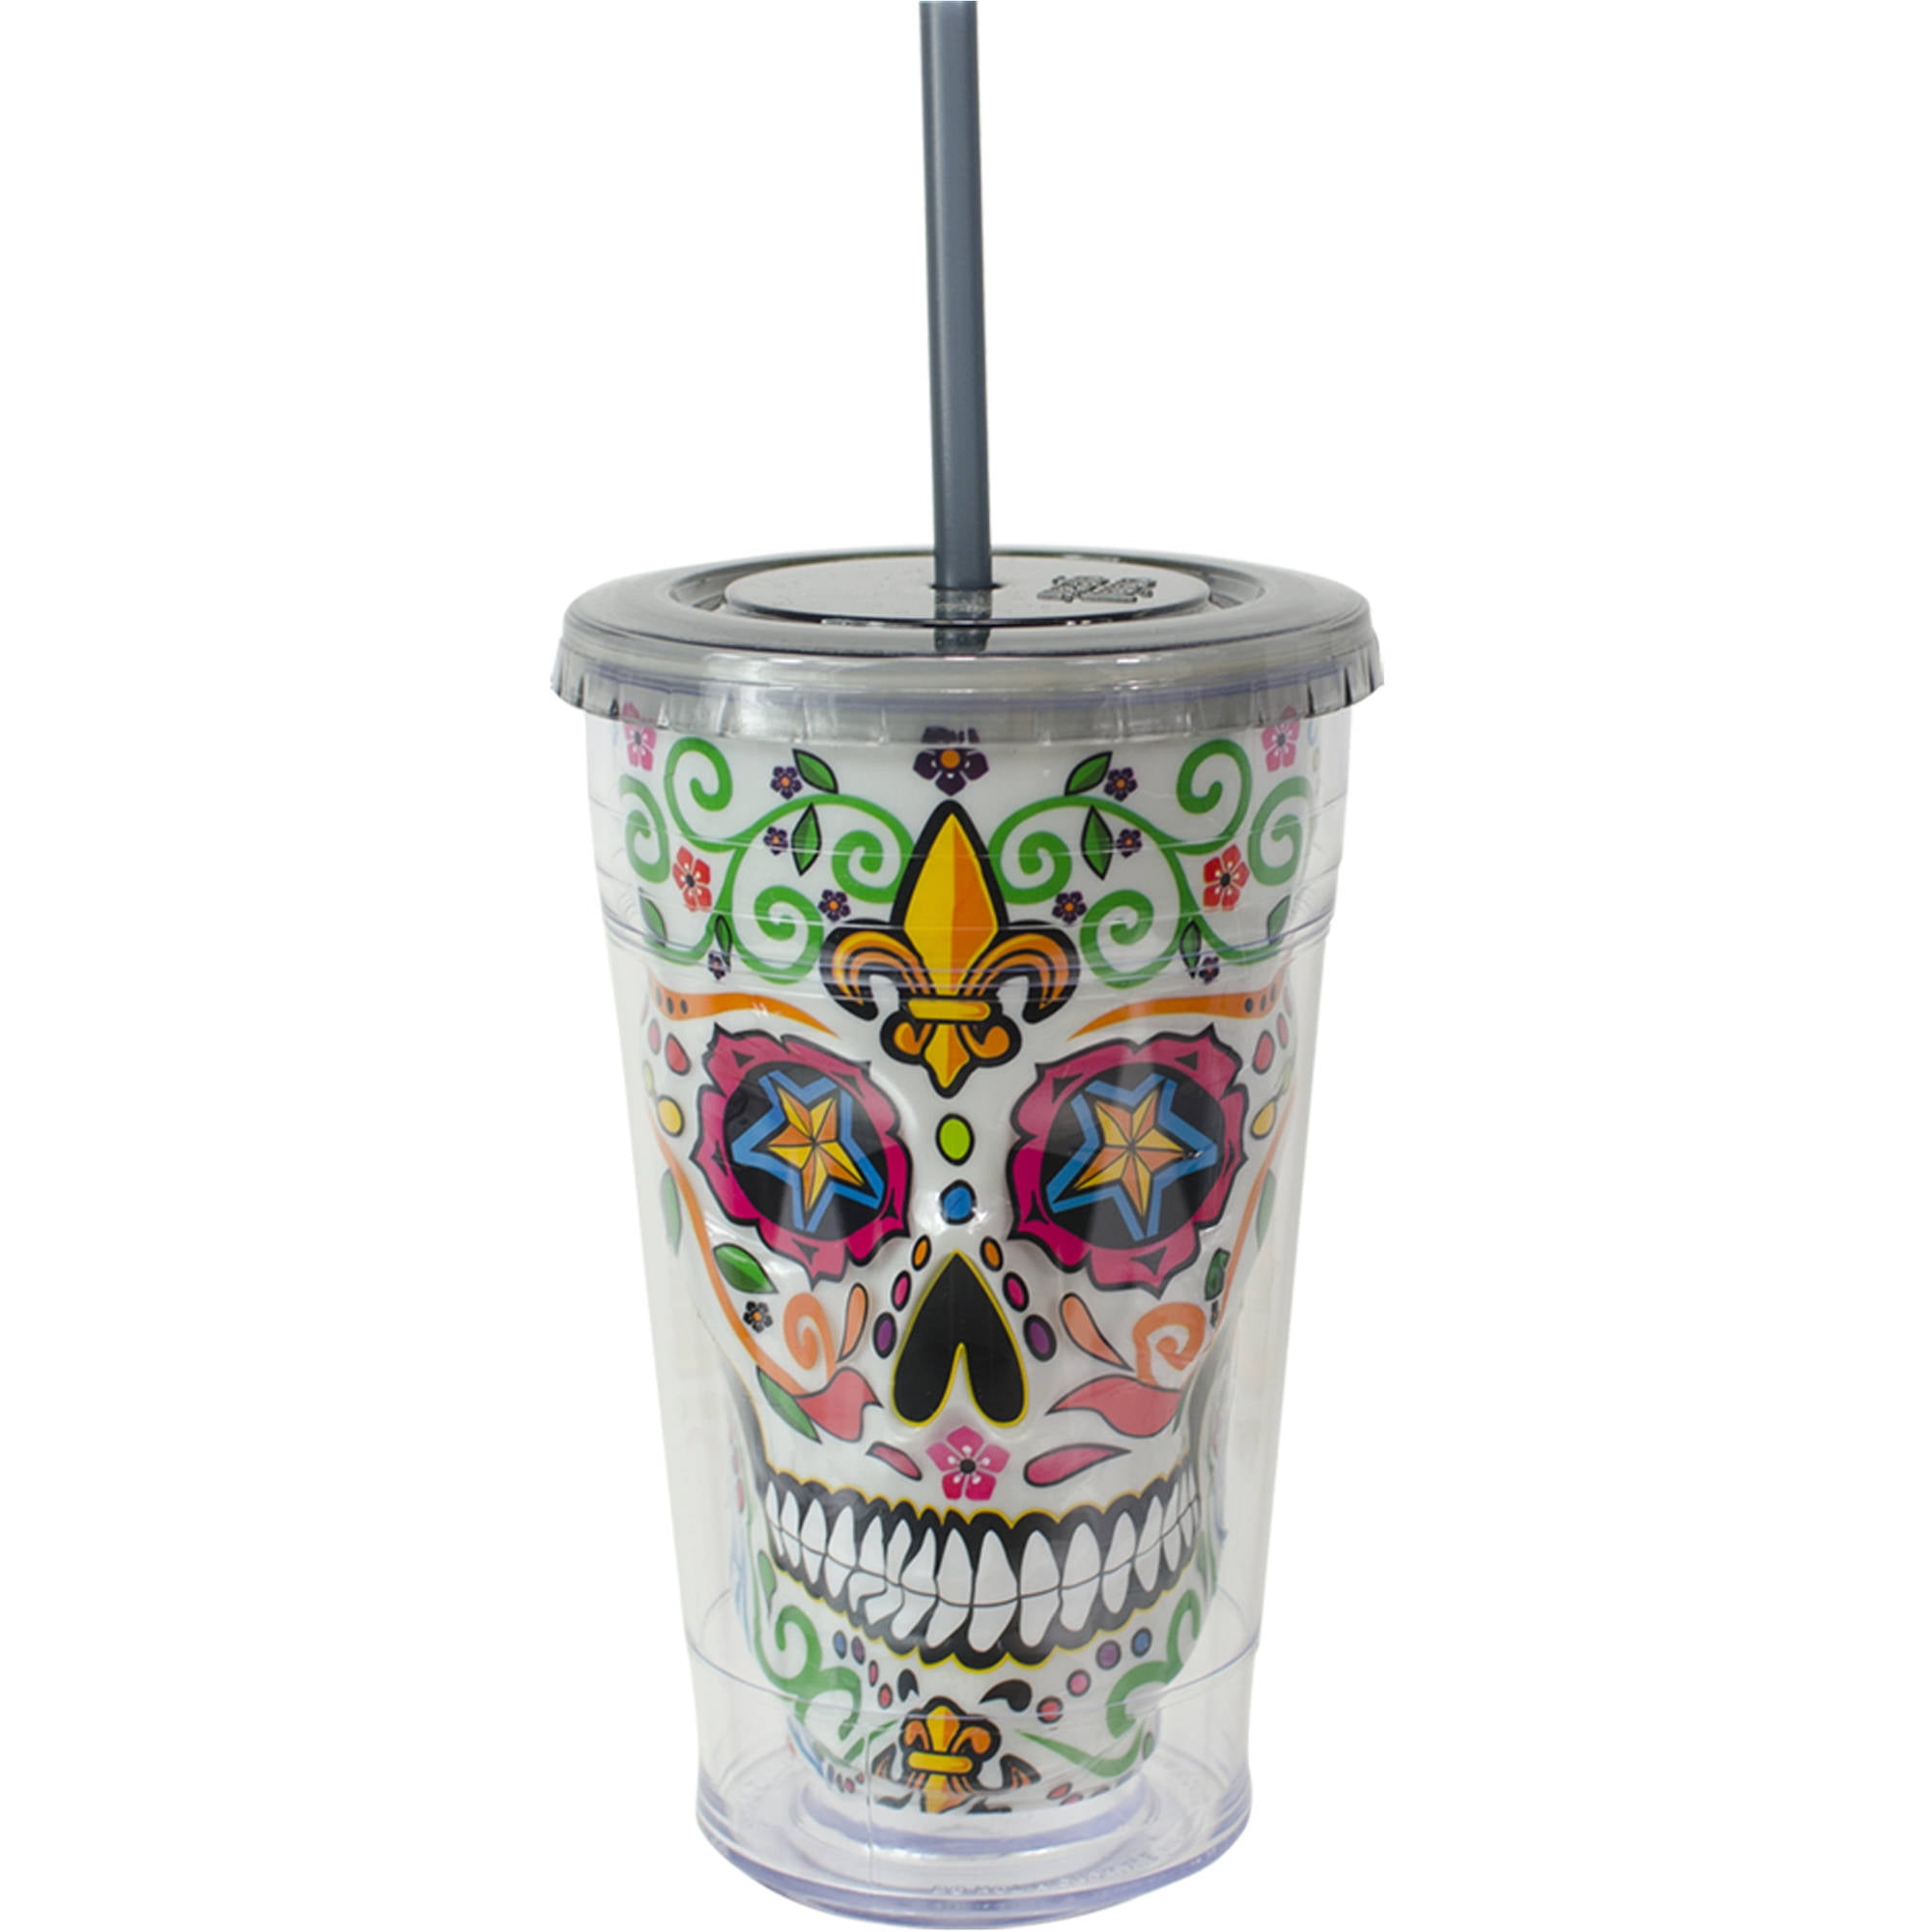 12oz Skinny Can Cooler Sugar Skull Stainless Steel Insulated